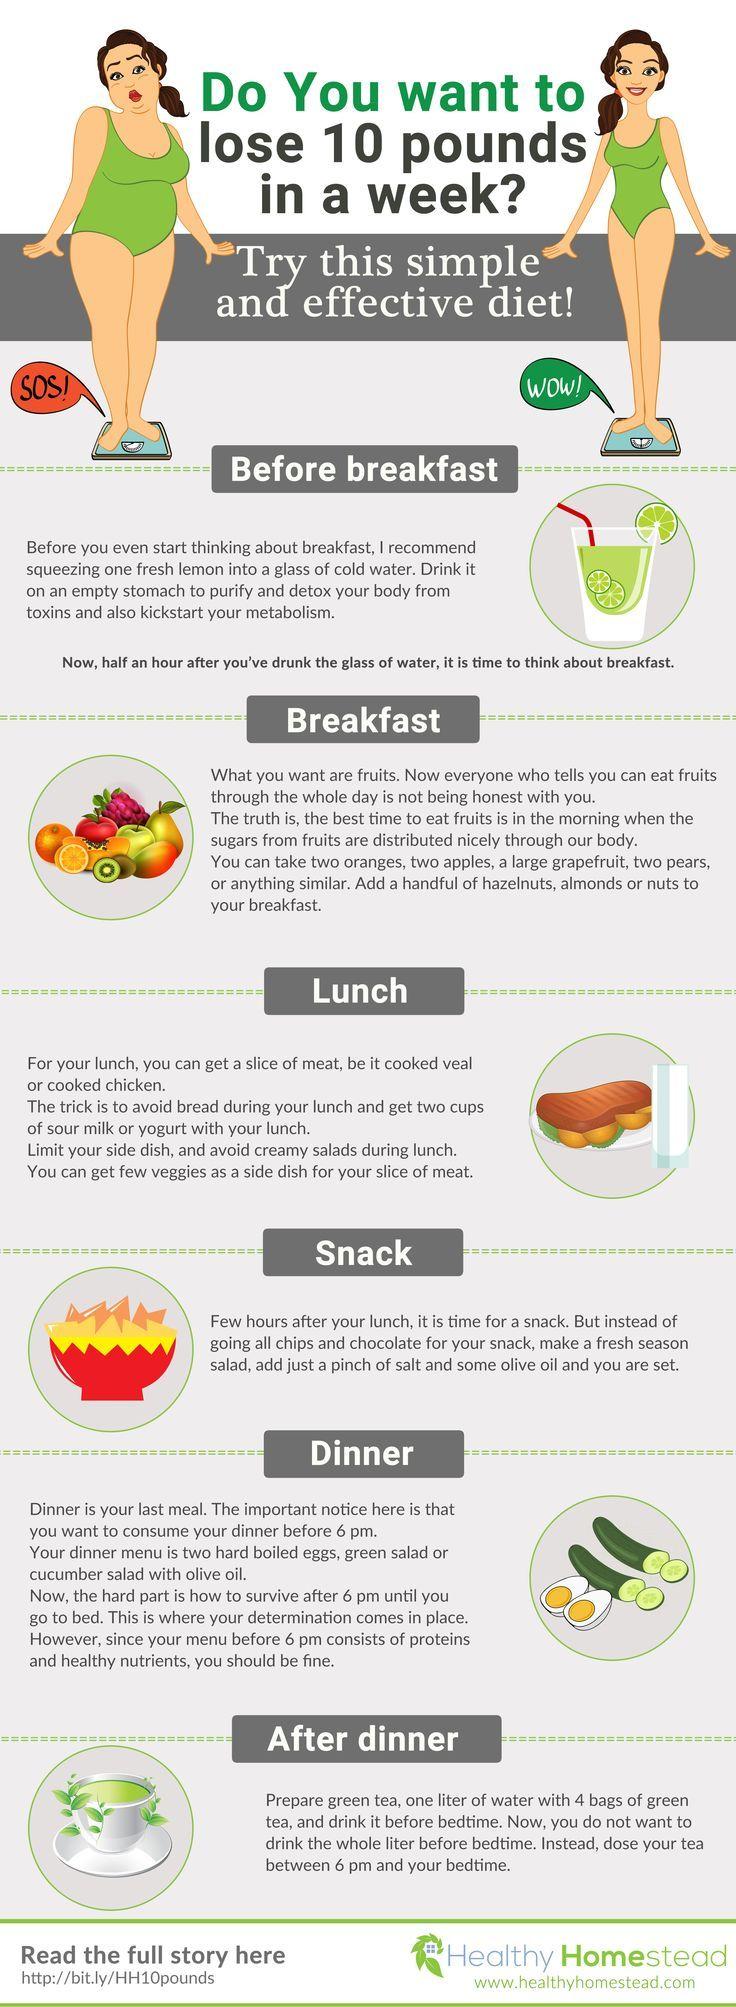 Wedding - Do You Want To Lose 10 Pounds In A Week? Try This Simple And Effective Diet!